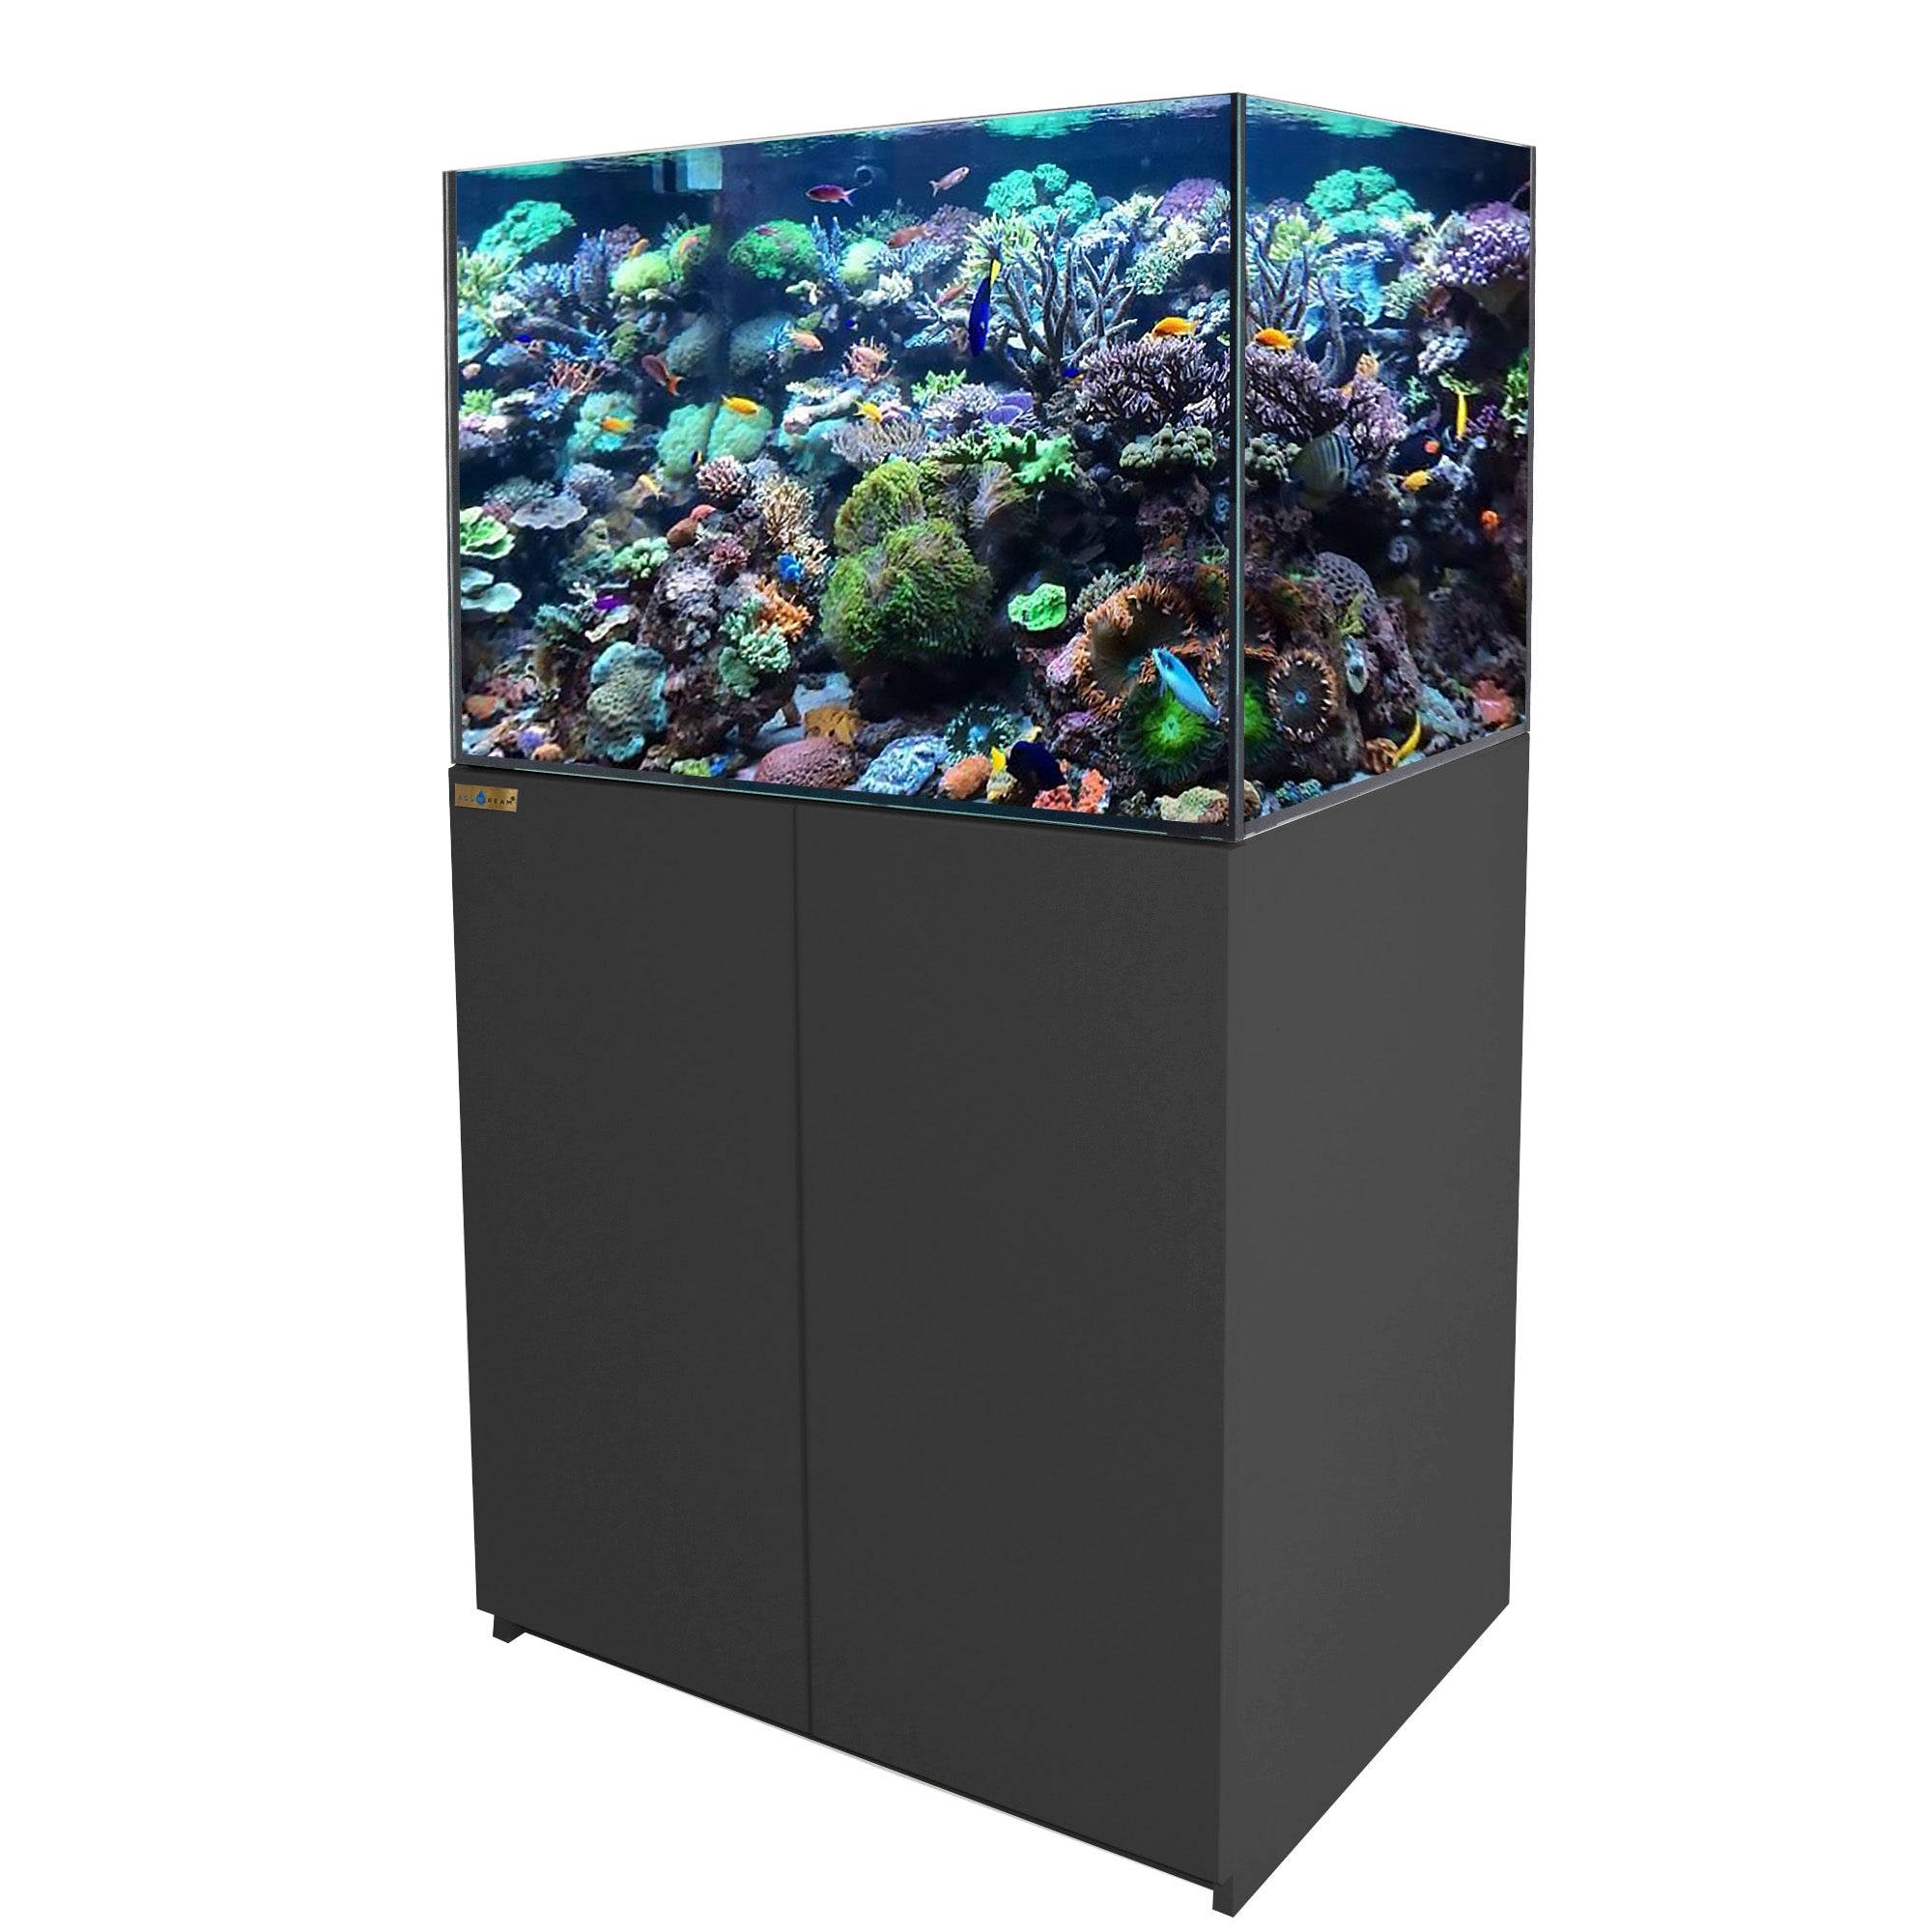 Fish Tank, Supplies, And Dresser, Fish Supplies For Sale